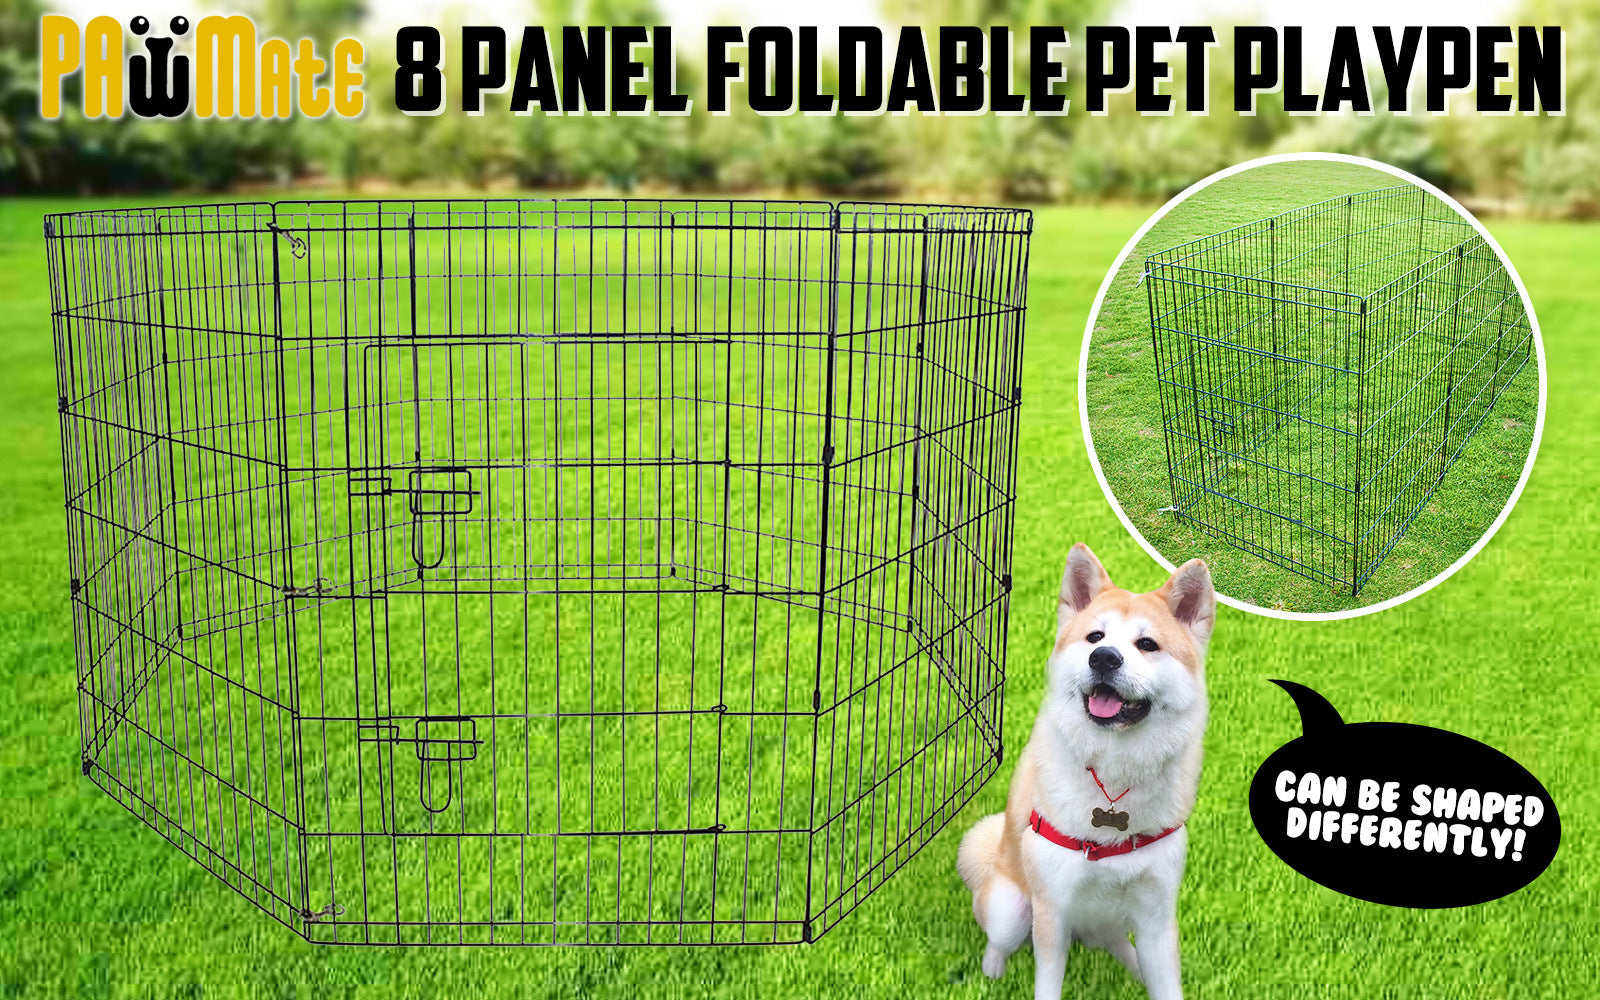 Pet Playpen 8 Panel 30in Foldable Dog Exercise Enclosure Fence Cage - image2